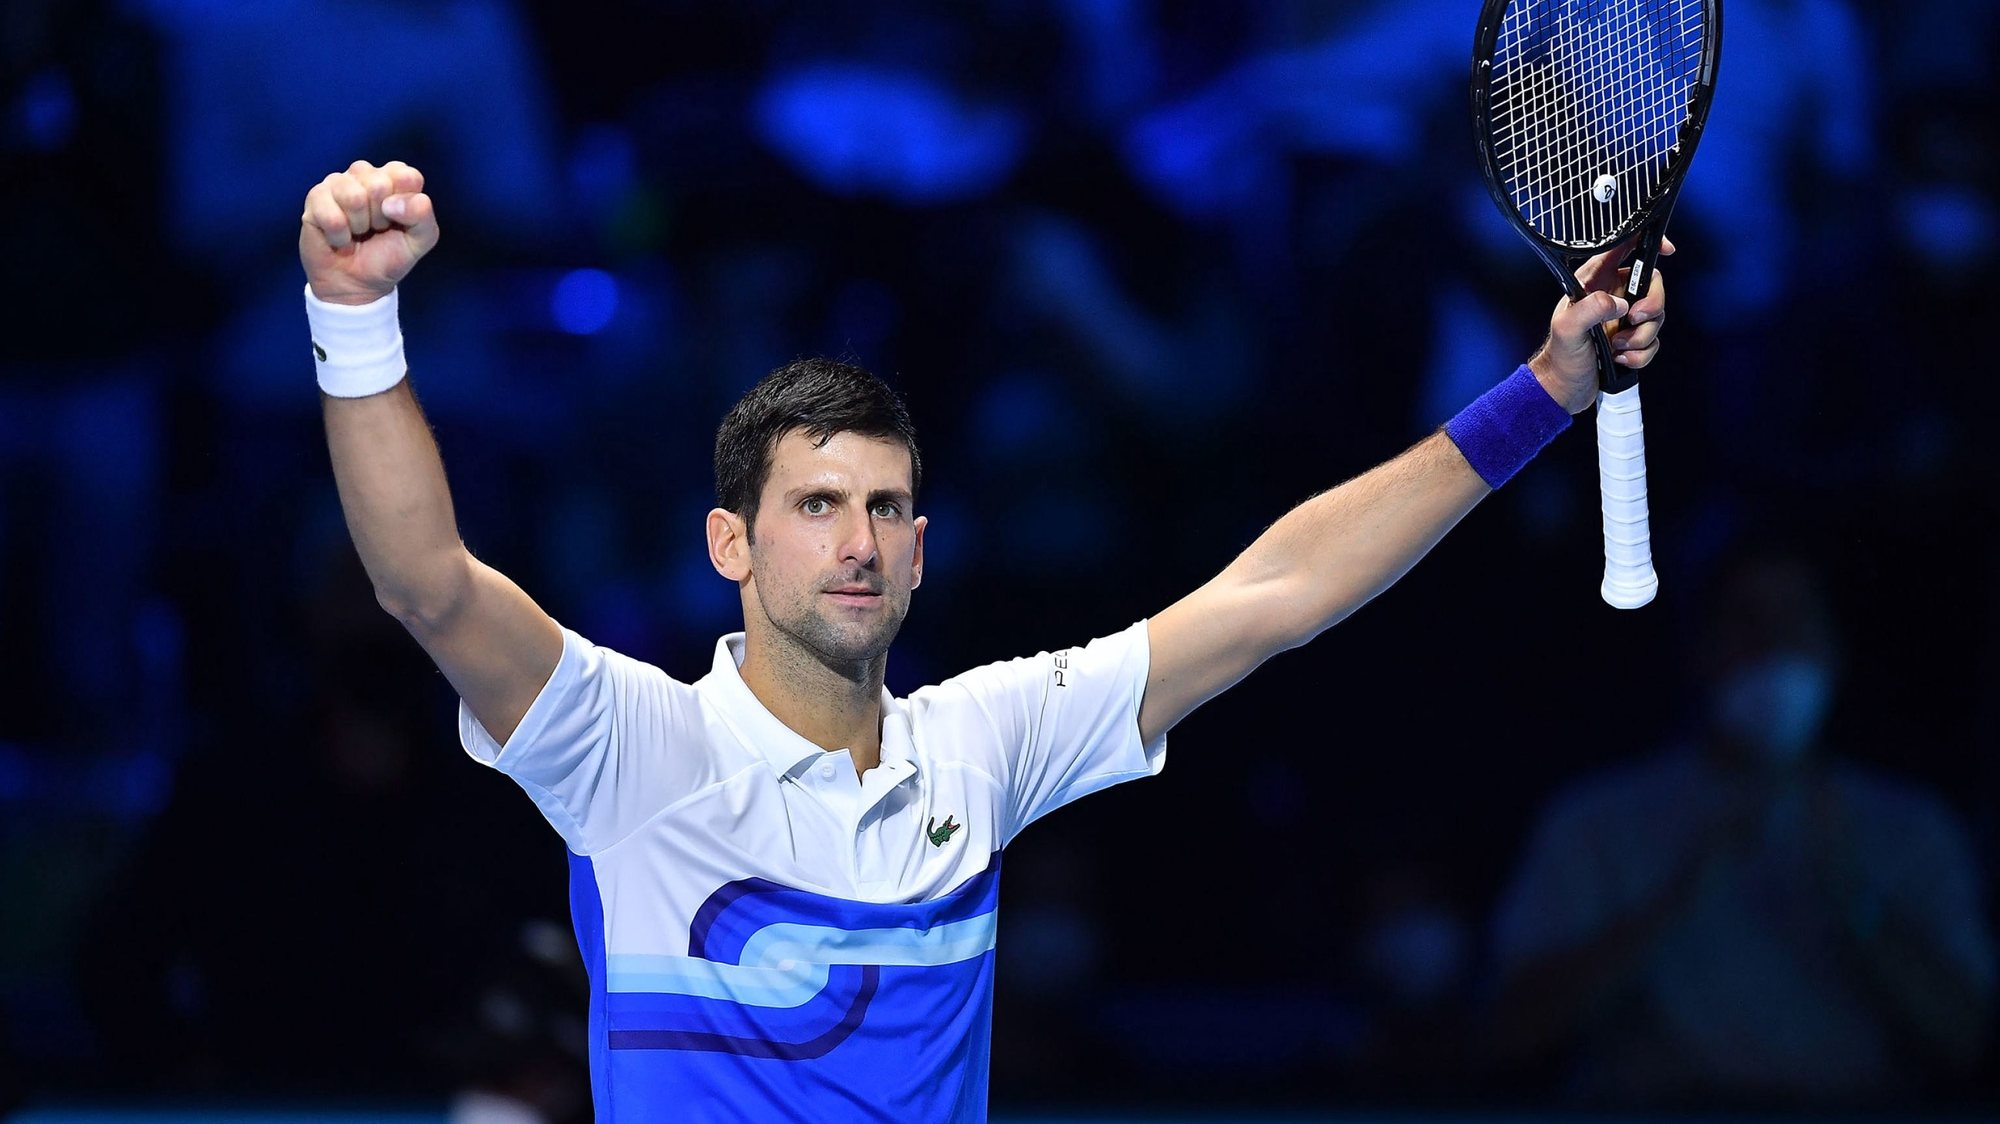 epa09587409 Novak Djokovic of Serbia celebrates after defeating Andrey Rublev of Russia in their group stage match of the Nitto ATP Finals tennis tournament in Turin, Italy, 17 November 2021.  EPA/Alessandro Di Marco